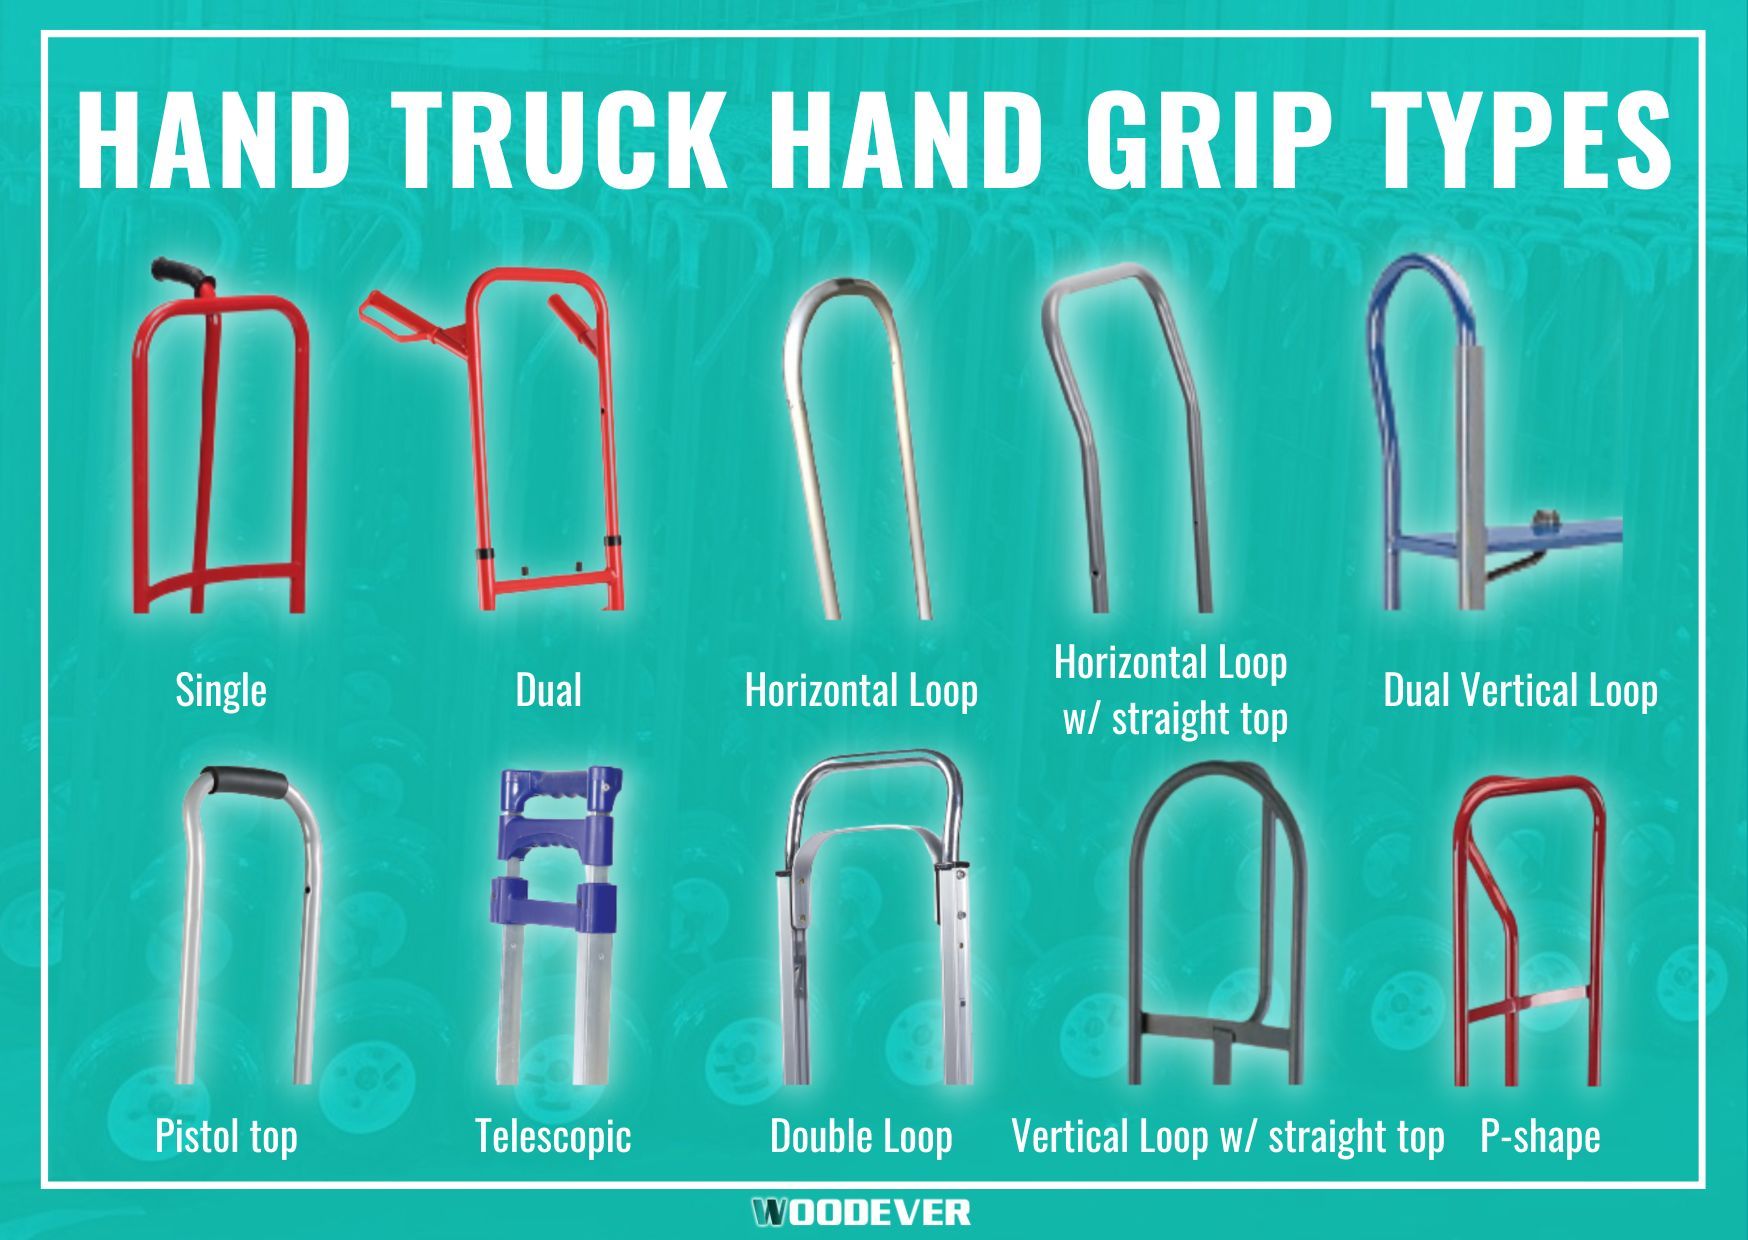 Common types of hand truck handle: single handgrip, dual hand truck, continuous hand grip